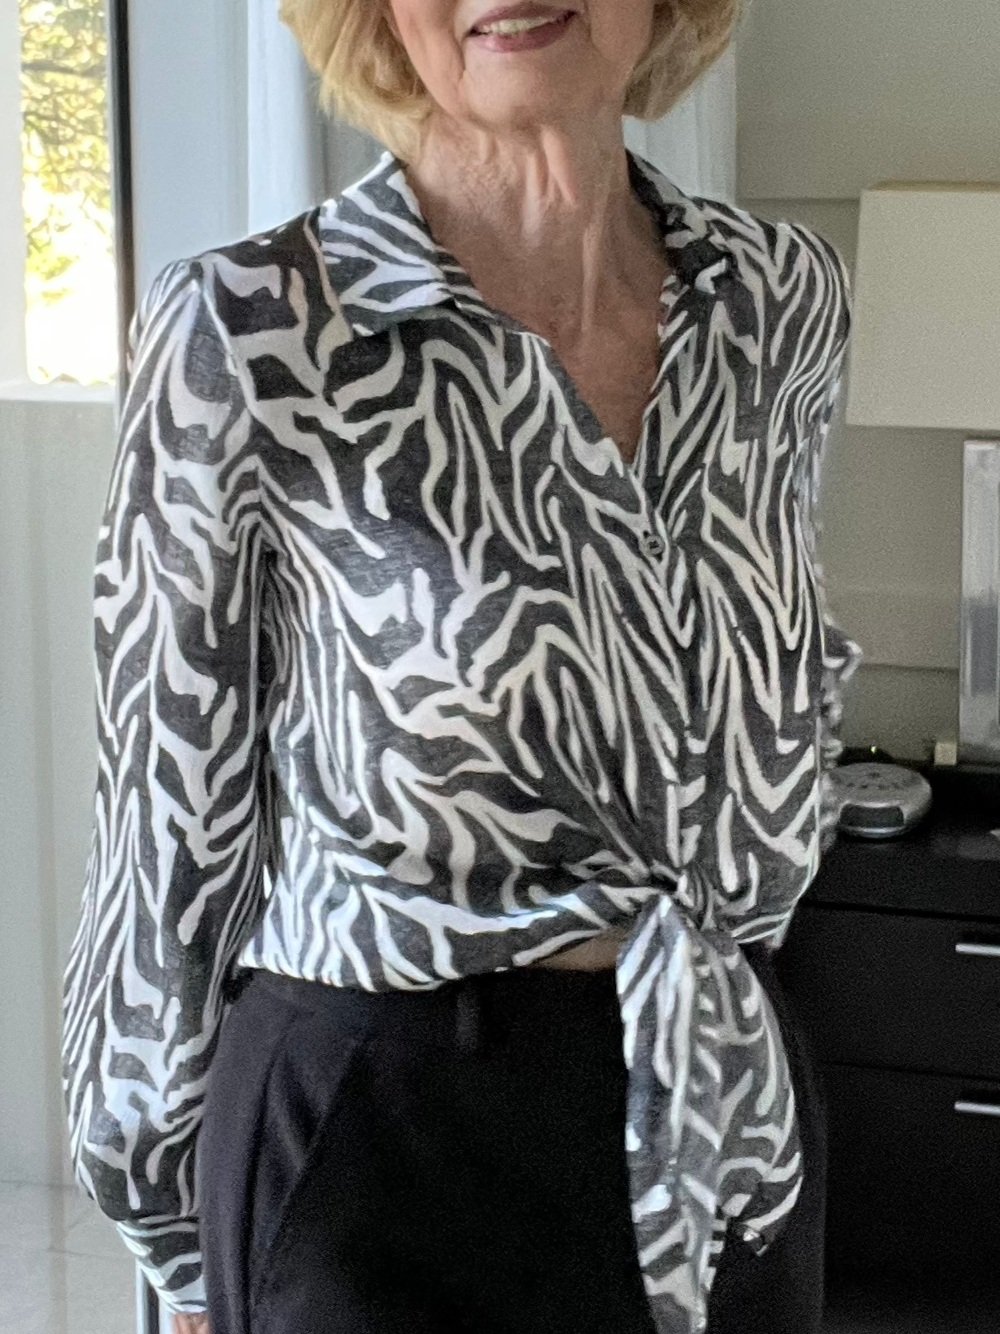 Shop My Closet! — Life in My 70s